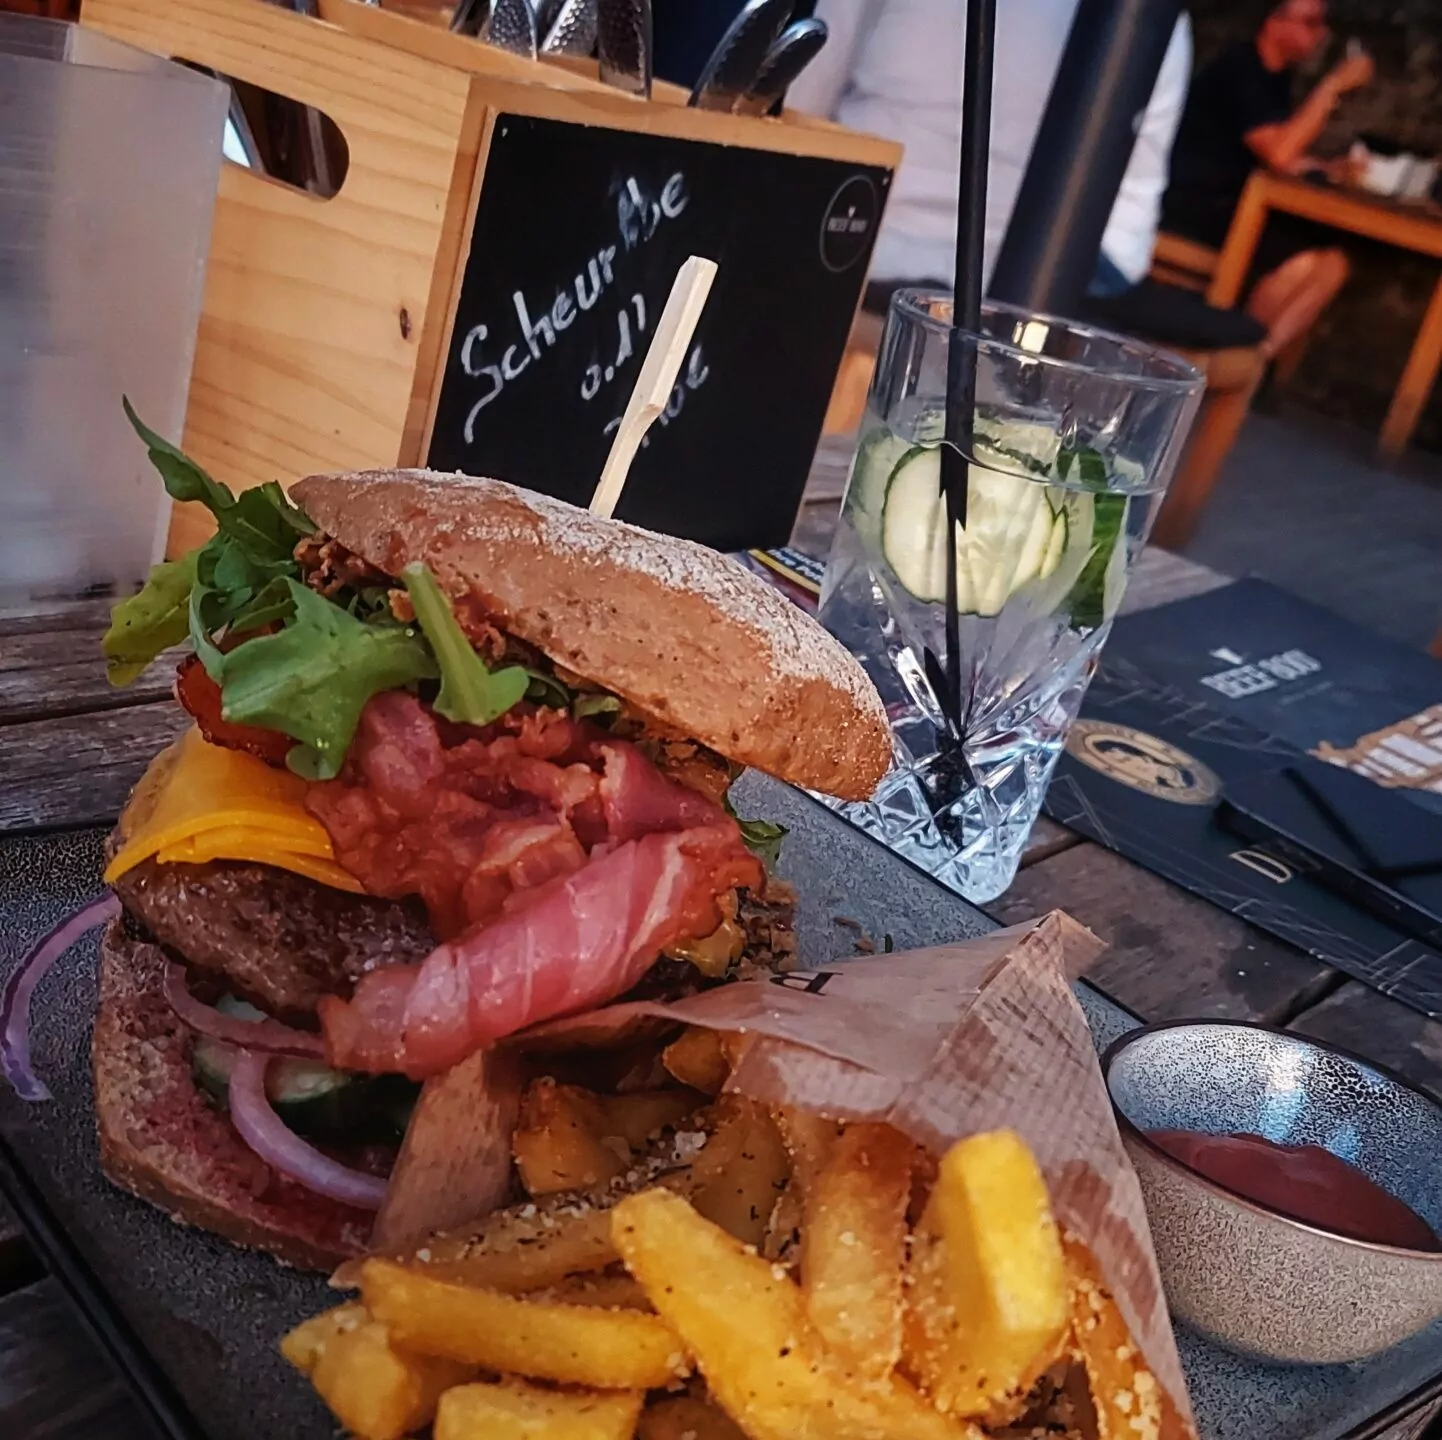 Huge classic bacon cheeseburger from Beef 800° in Würzburg with juicy beef, crispy bacon, tender cheddar, fresh arugula, onions and tomatoes, and spicy sauces. Served with hearty Grana Padano and rosemary fries, along with one or two, or even three gin and tonics. Or four. Price: 13,50 + 4,90 EUR.